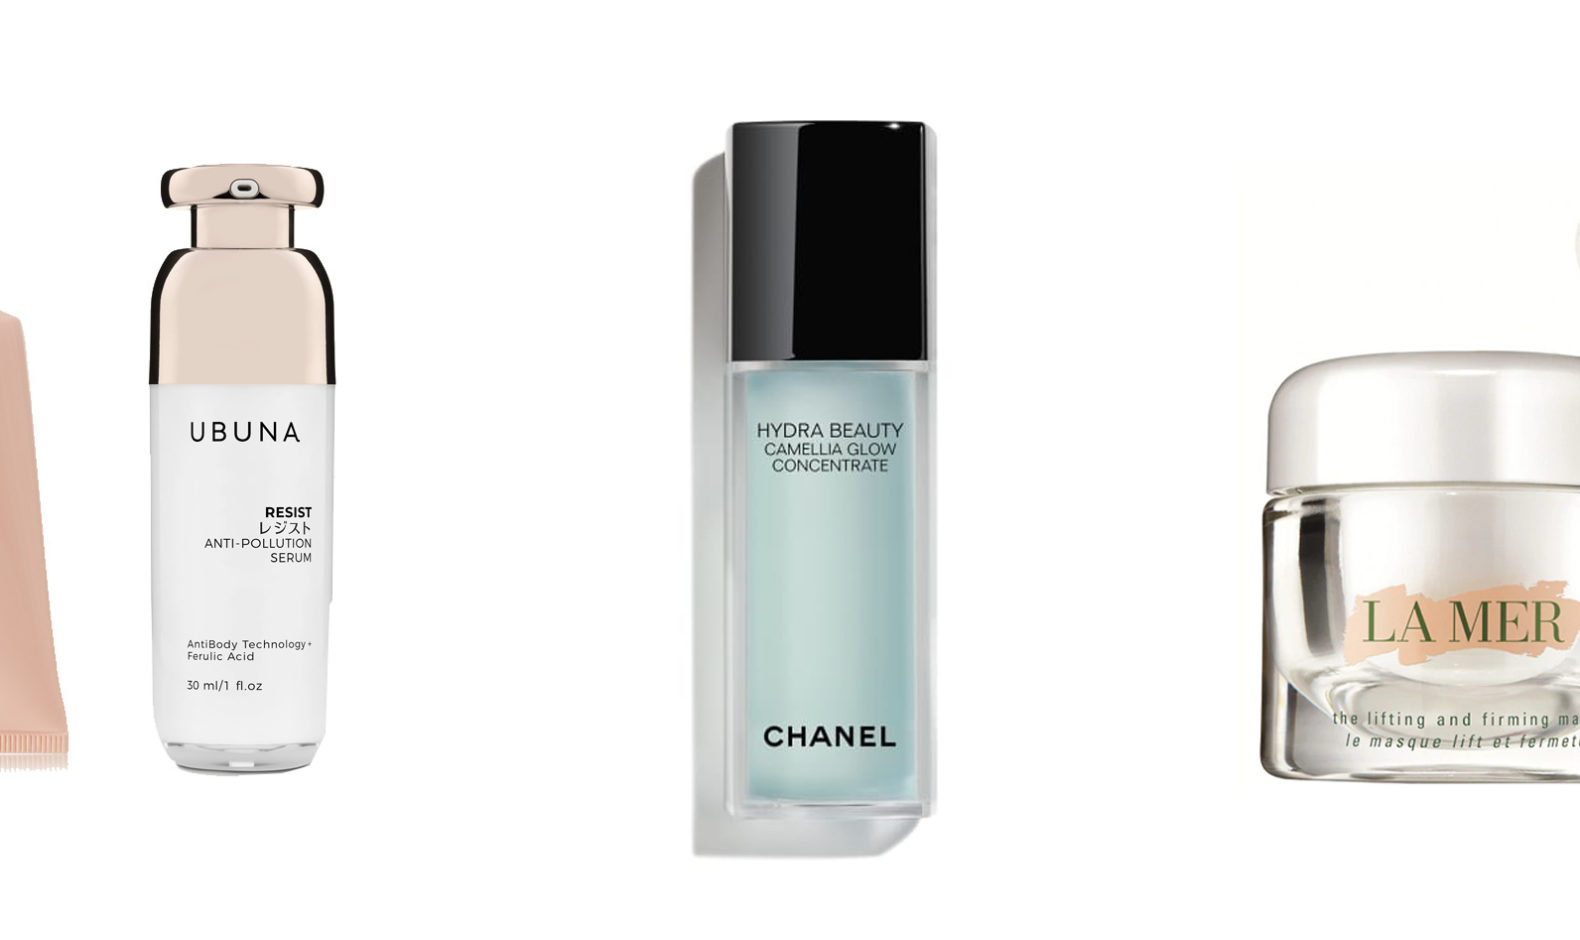 Chanel hydra beauty micro serum >>> everything else I've tried for my